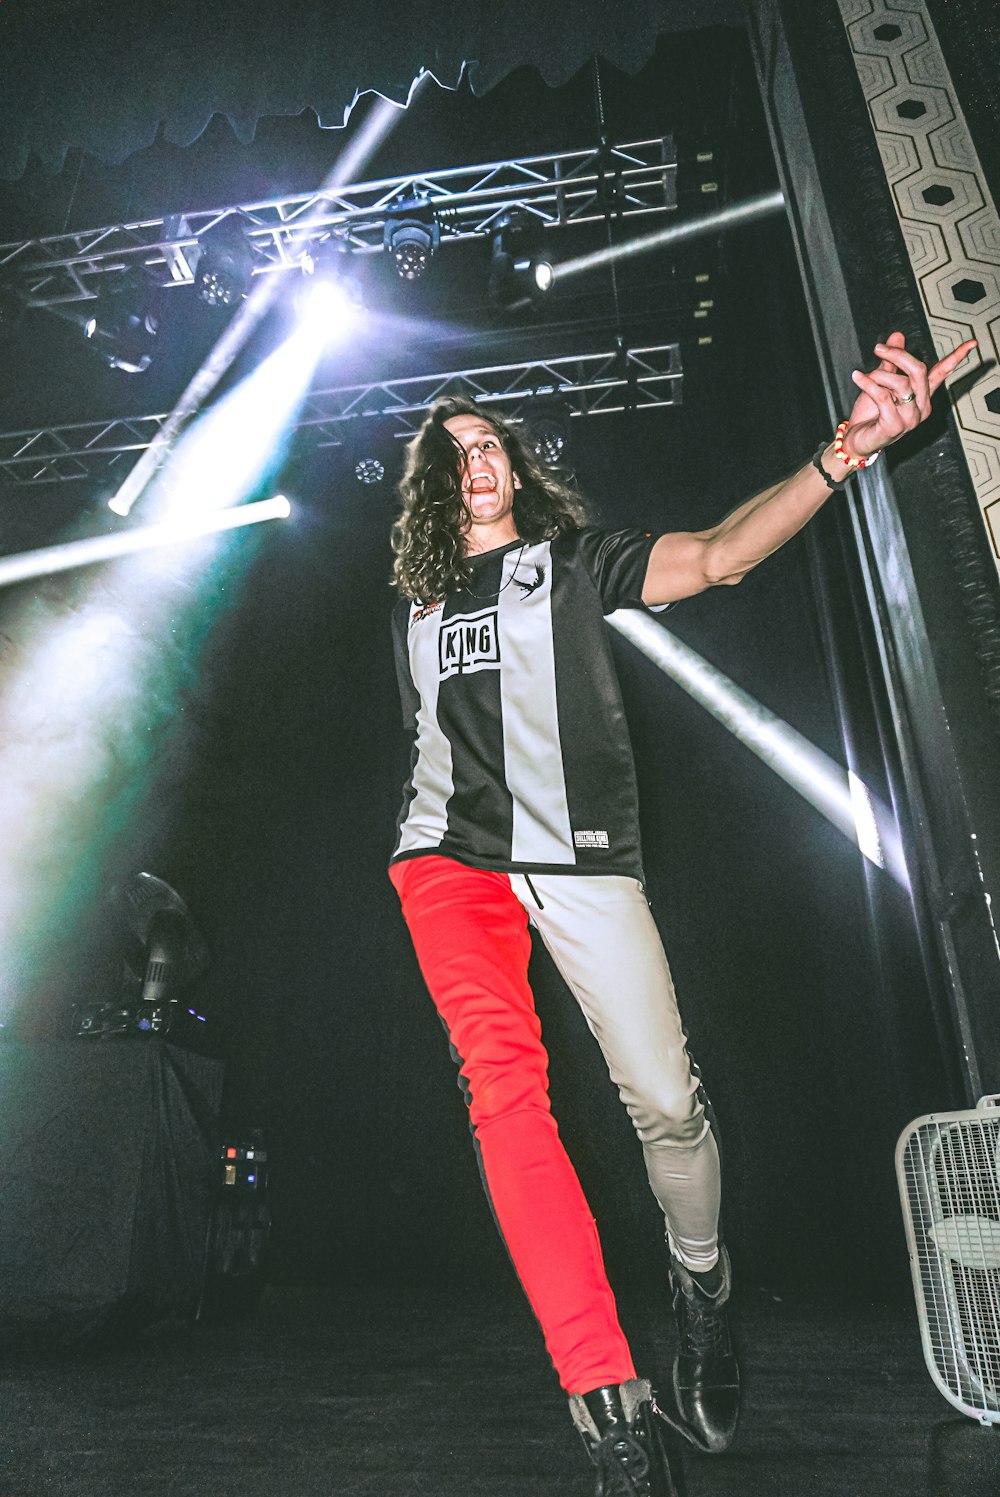 woman in white and black shirt and red pants standing on stage